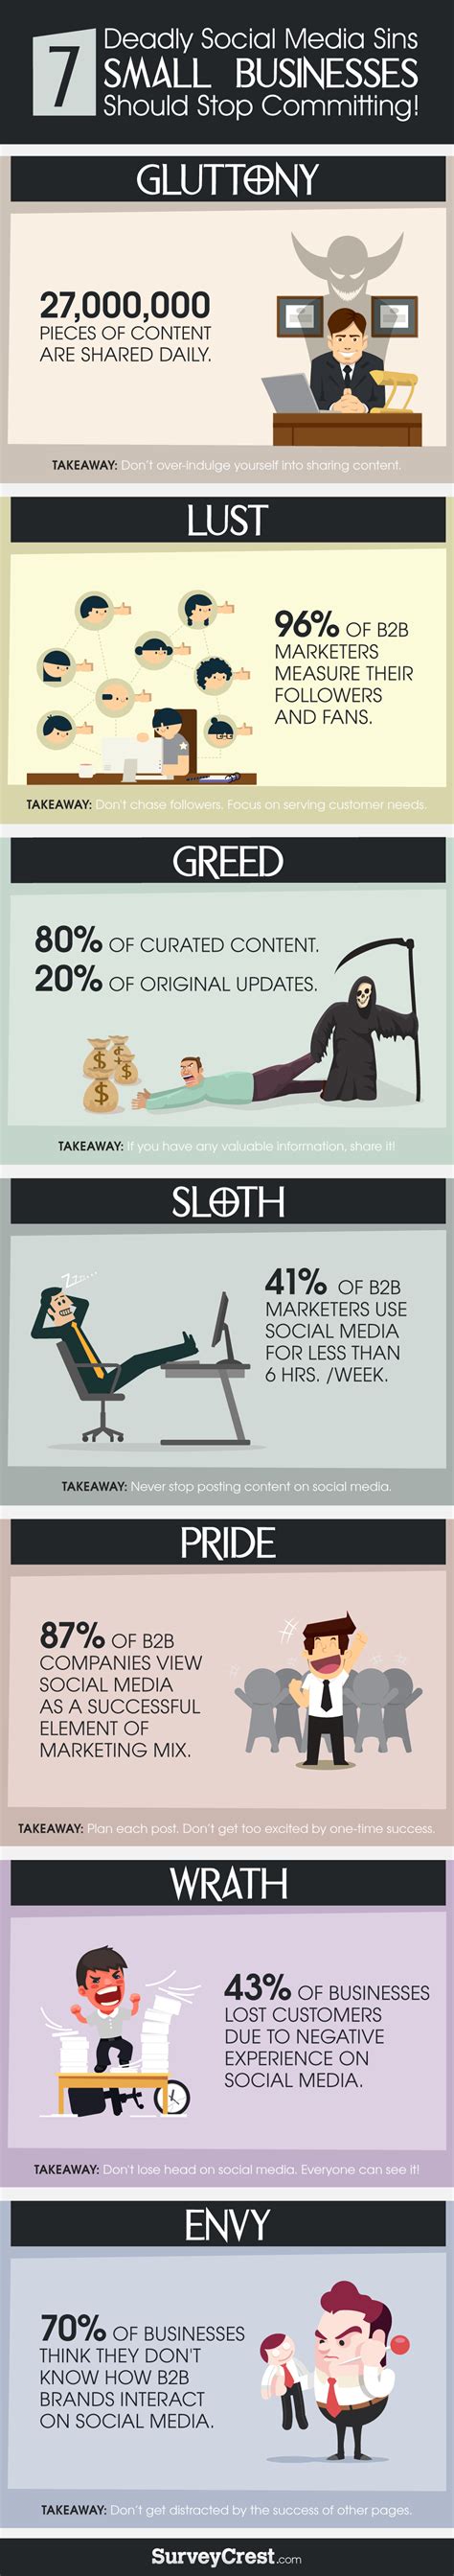 [infographic] 7 deadly social media sins small businesses should stop committing